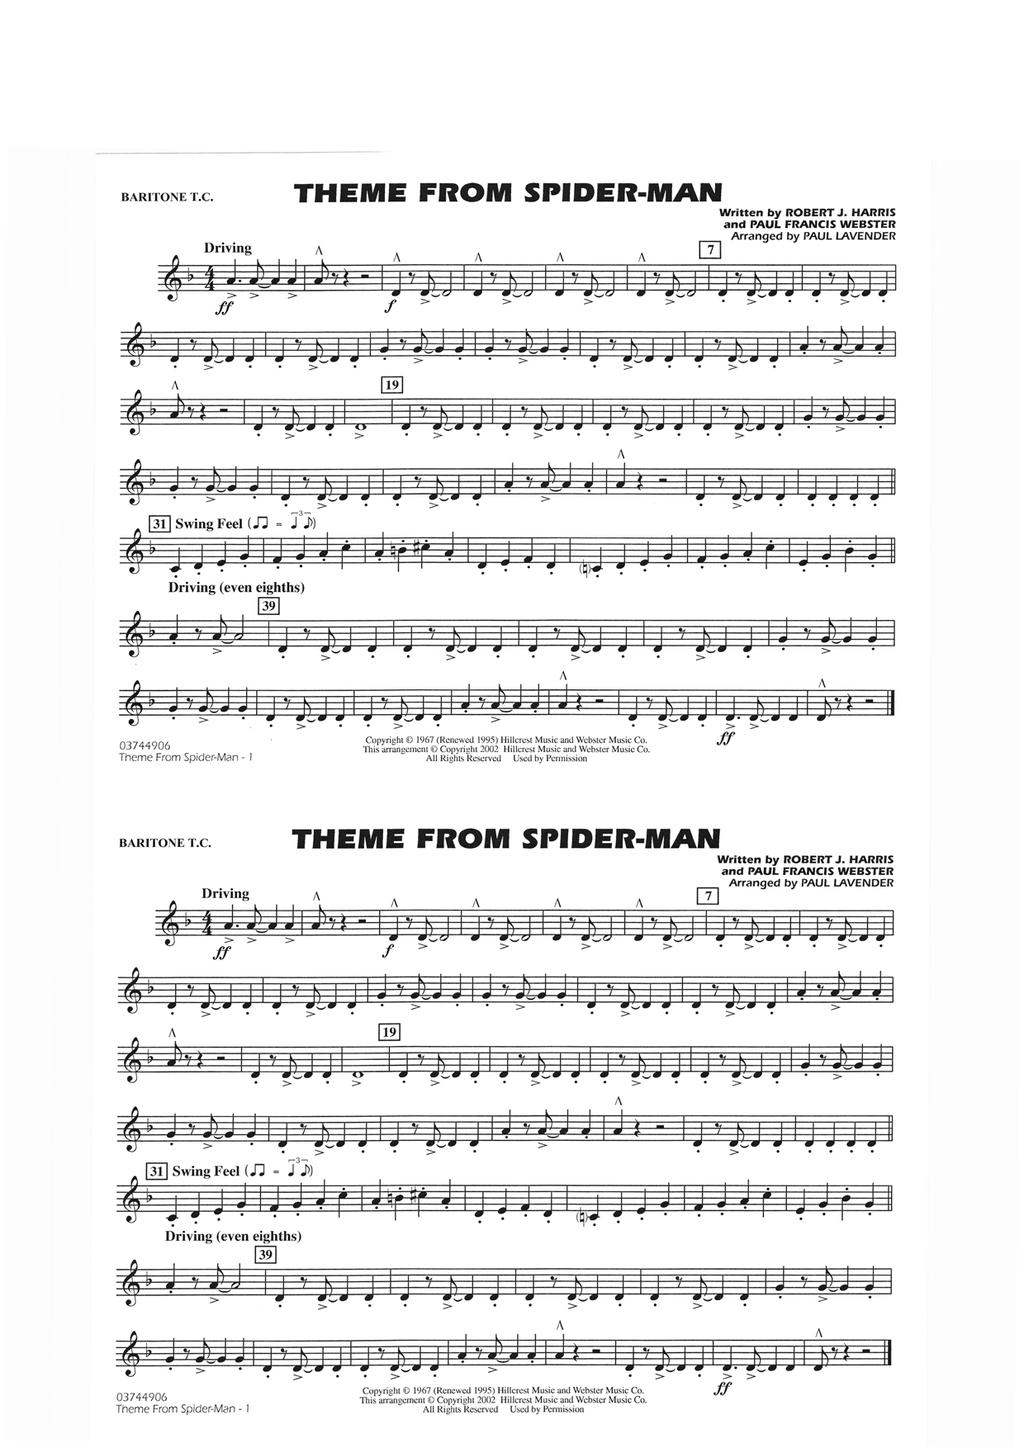 BARITONE T.C. THEME FROM SPIDER.MAN ANd PAUI FRANCIS WEBSTER Arranqed by PAUL IAVENDER EJ @] Swing FeeI A Copyright @ 1967 (Renewed 1995) Hillcrest Music and Webster Music Co.